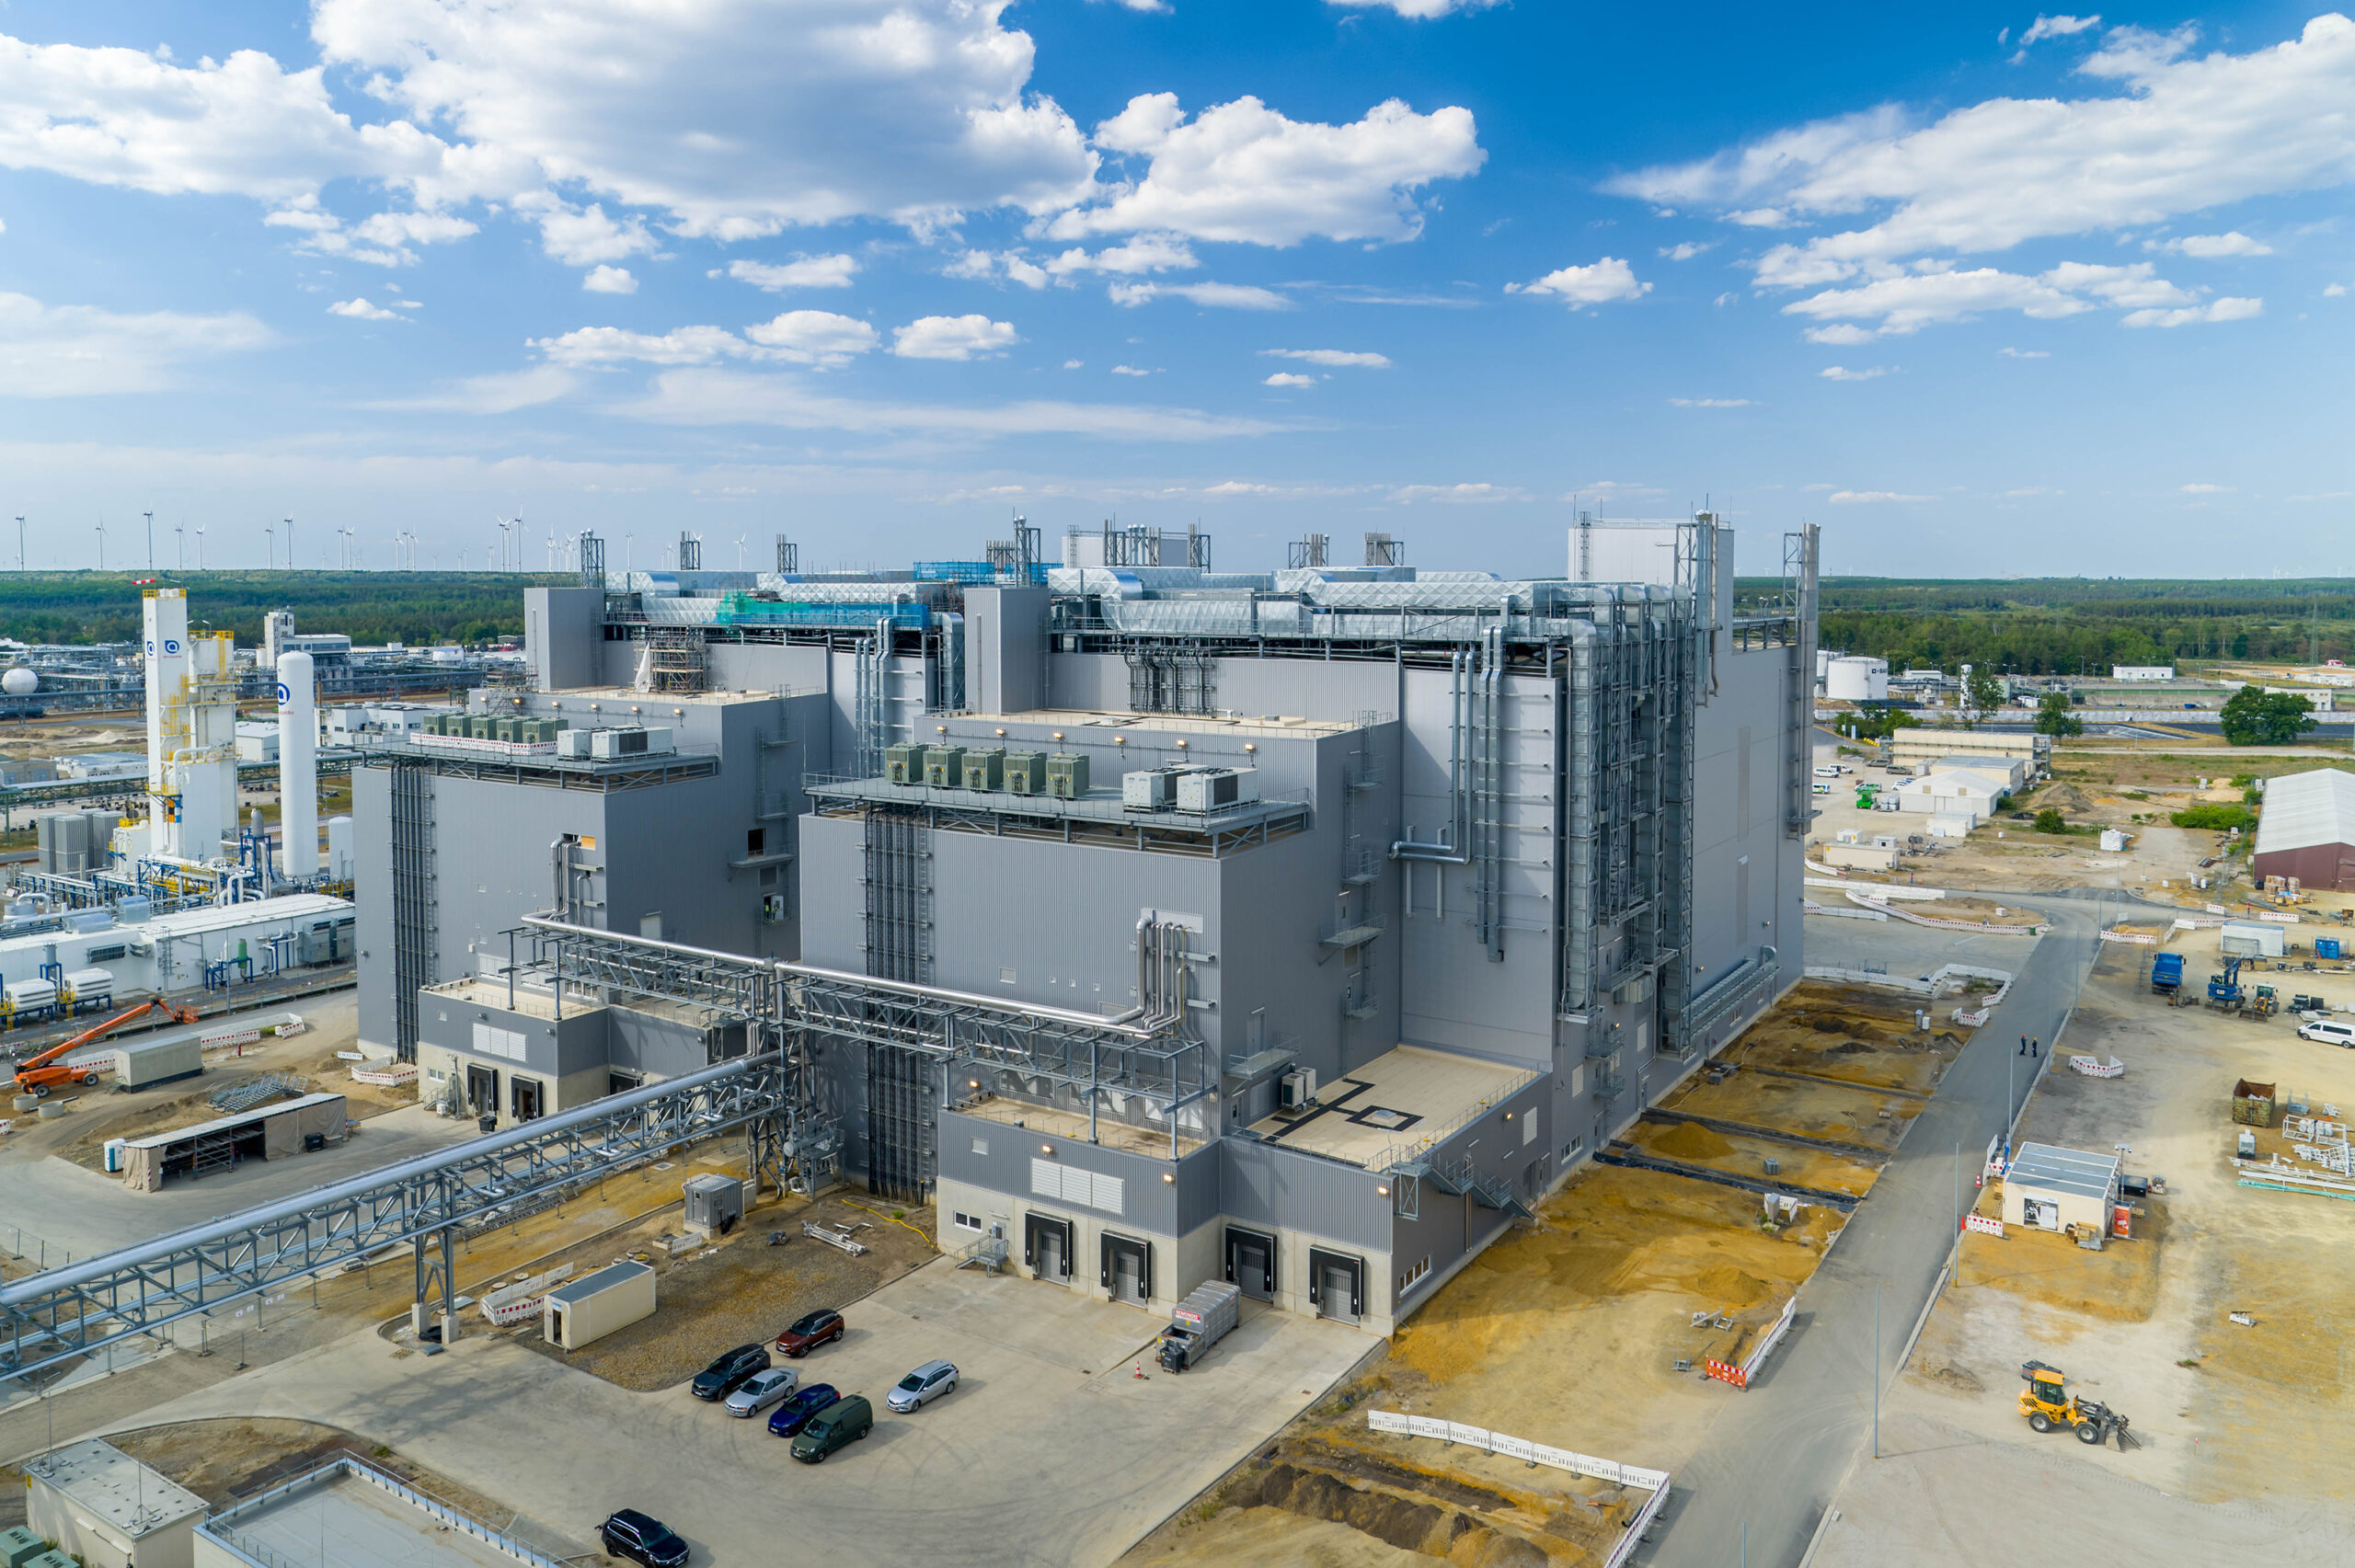 With the cathode active materials plant in Schwarzheide, Germany, BASF now produces in all three main markets worldwide: Europe, Asia and North America. It is the first production plant for high-performance cathode active materials in Germany and the first fully automated large-scale plant for the production of cathode active materials in Europe.